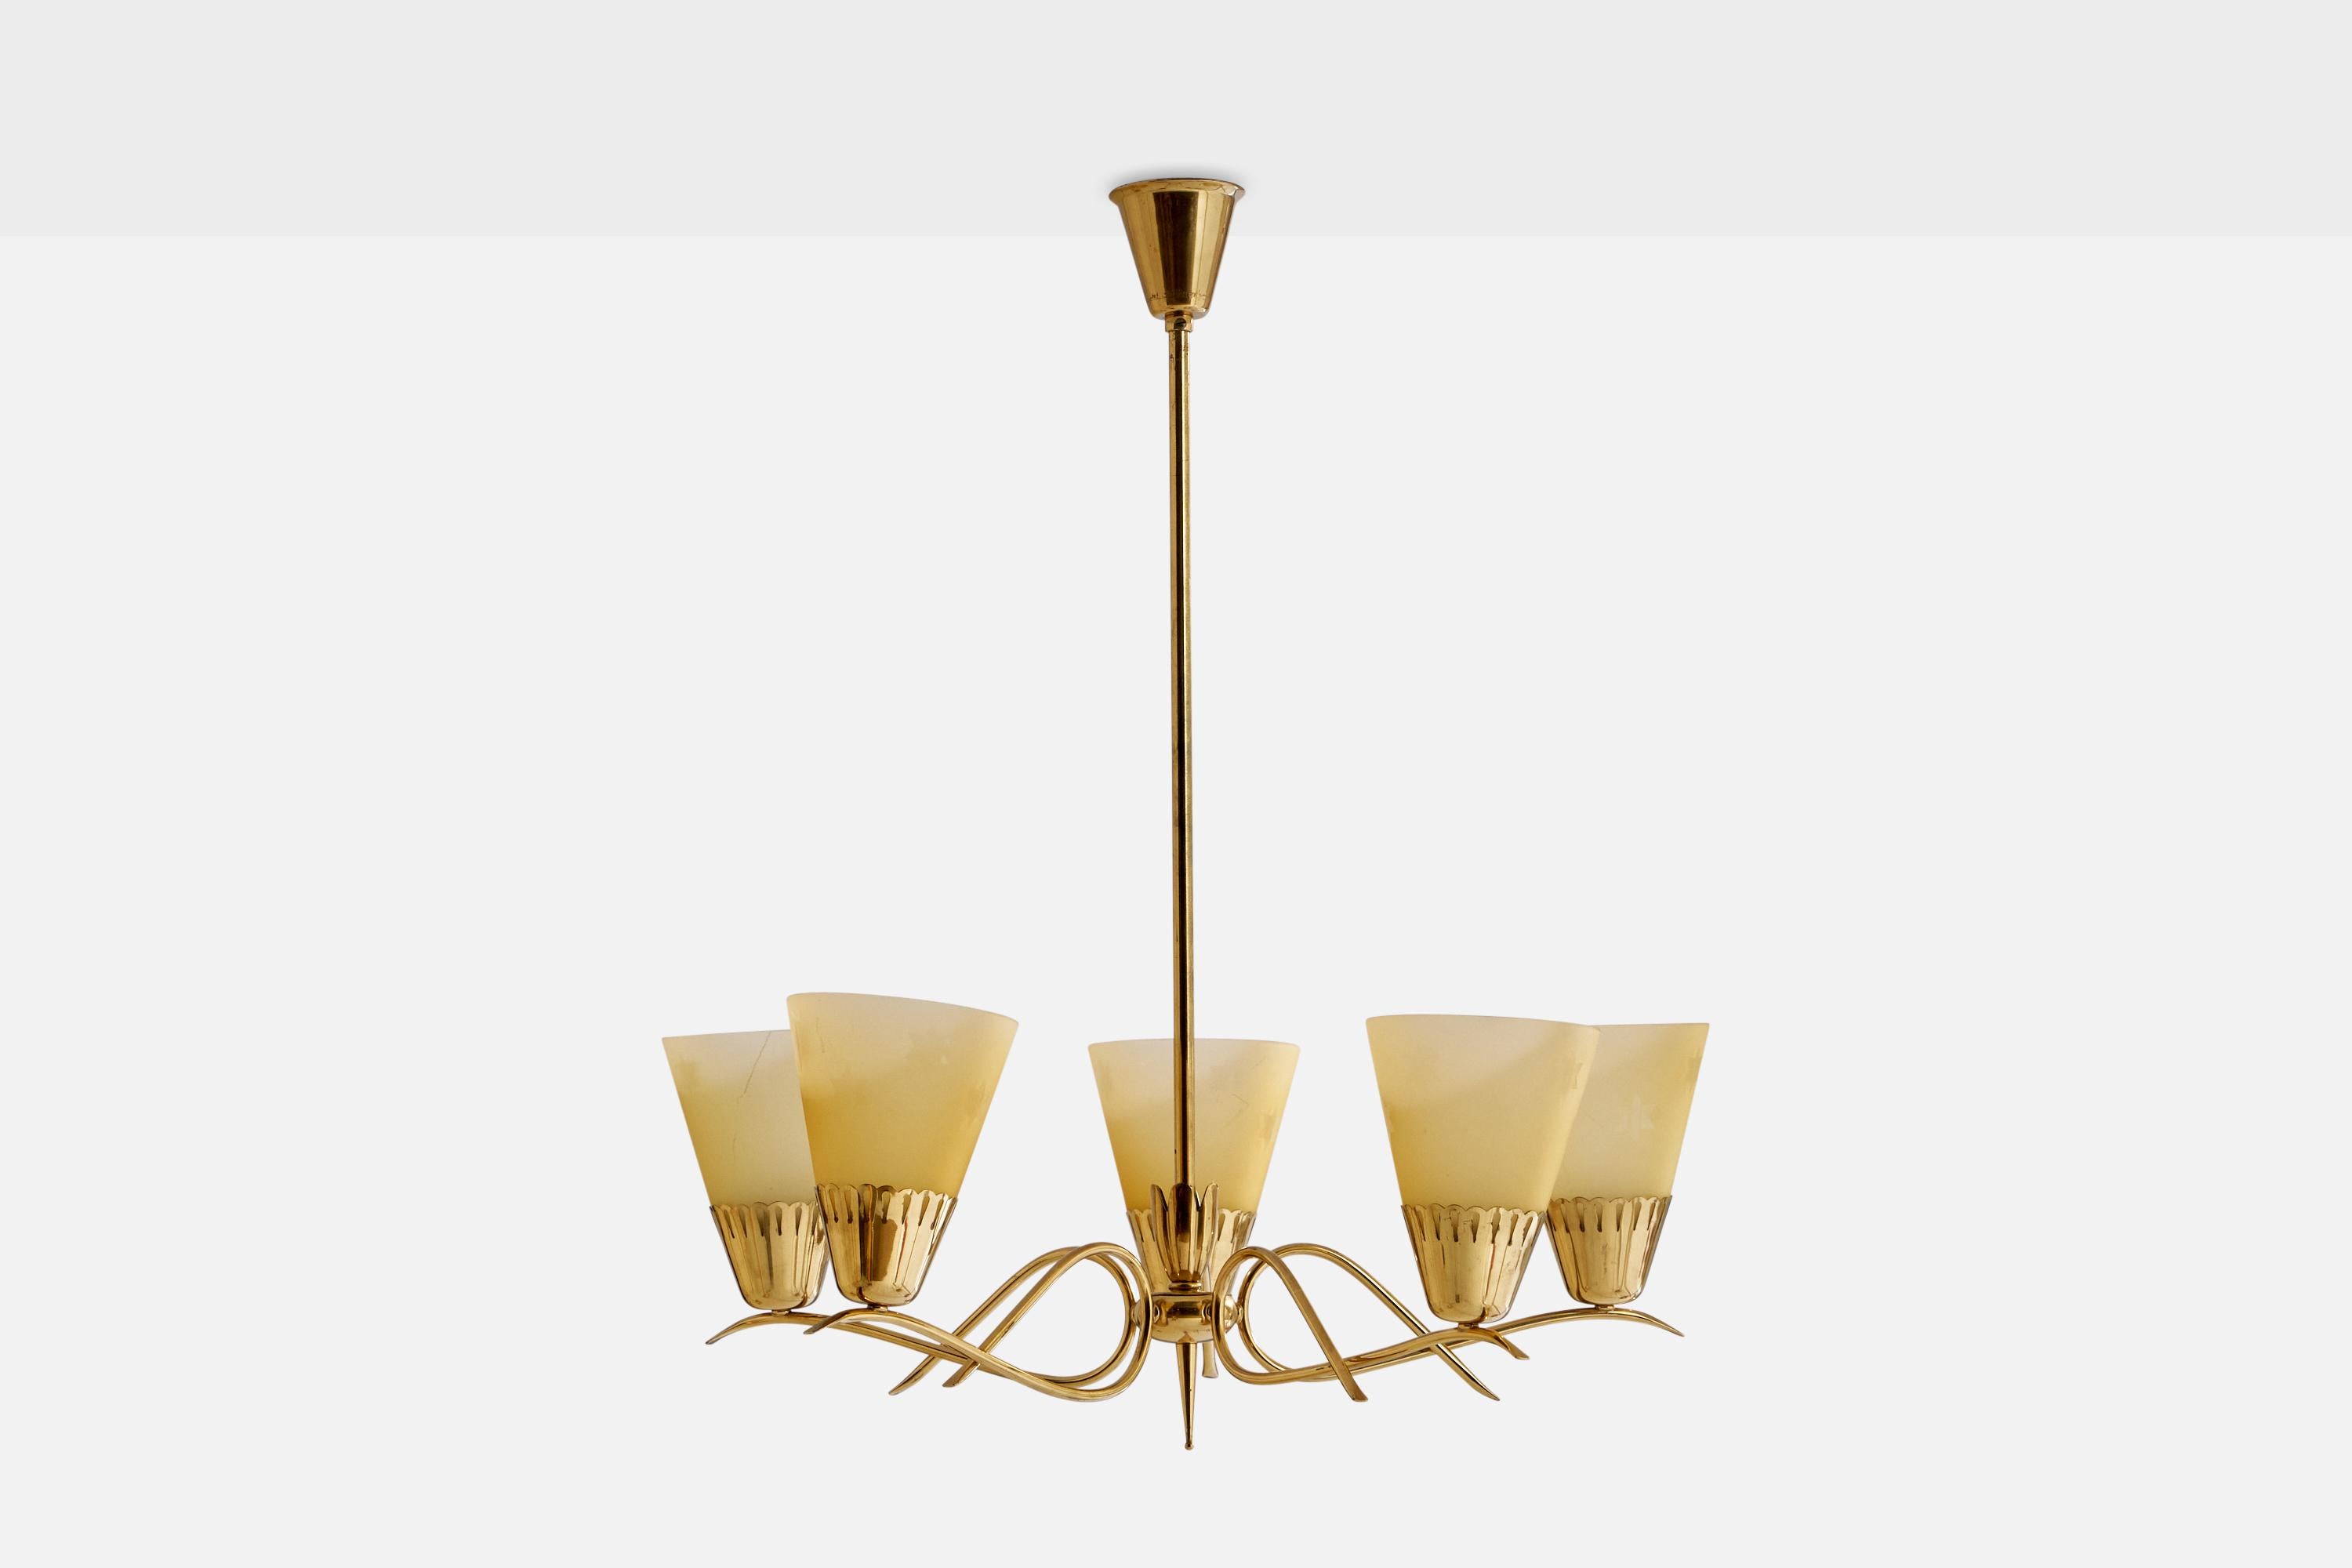 A brass and beige opaline glass chandelier designed and produced in Sweden, 1940s.

Dimensions of canopy (inches): 3.15” H x 3.25” Diameter
Socket takes standard E-26 bulbs. 5 sockets.There is no maximum wattage stated on the fixture. All lighting